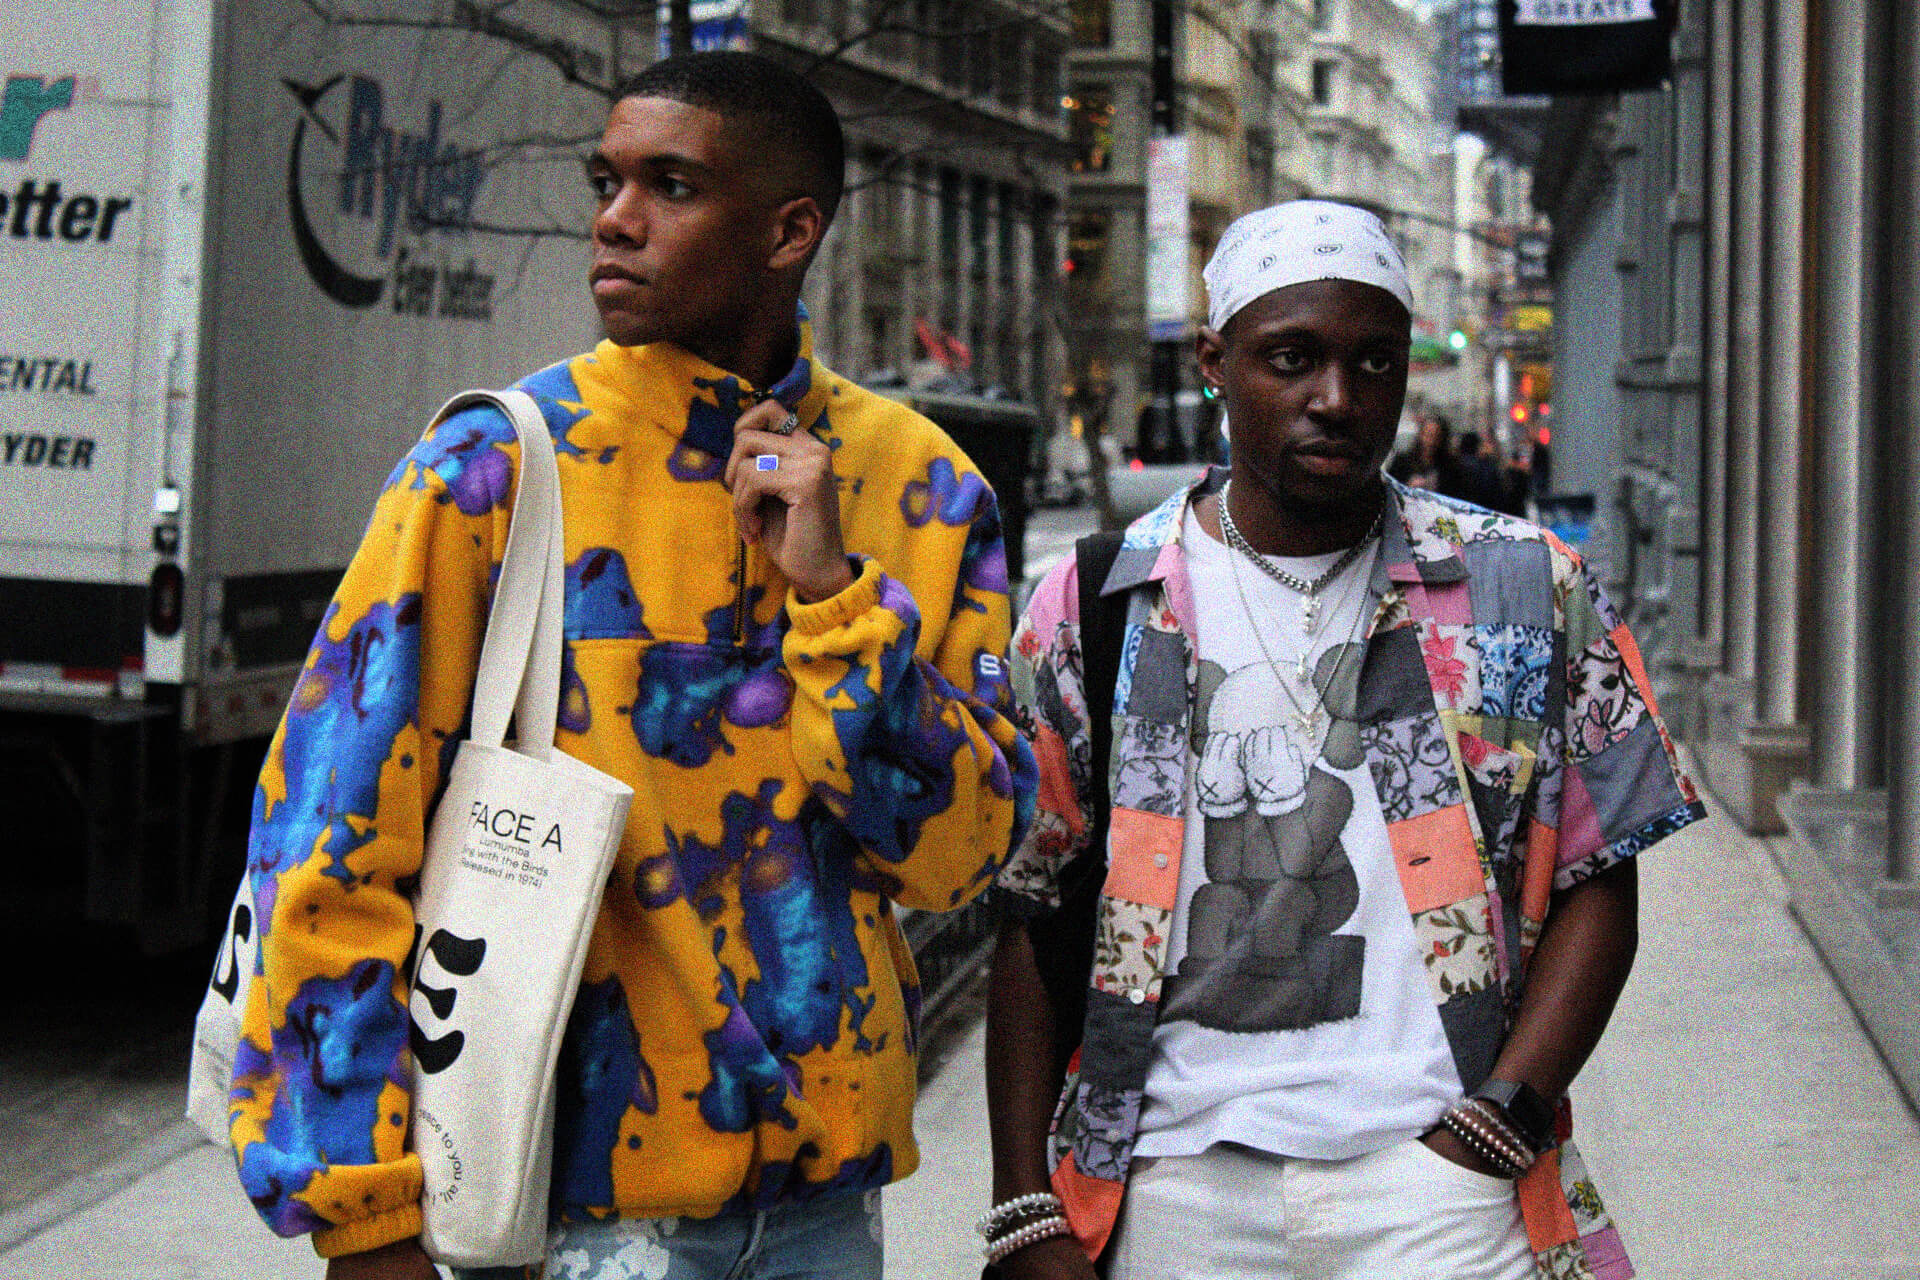 two men in brighly colored shirts on the streets of NYC